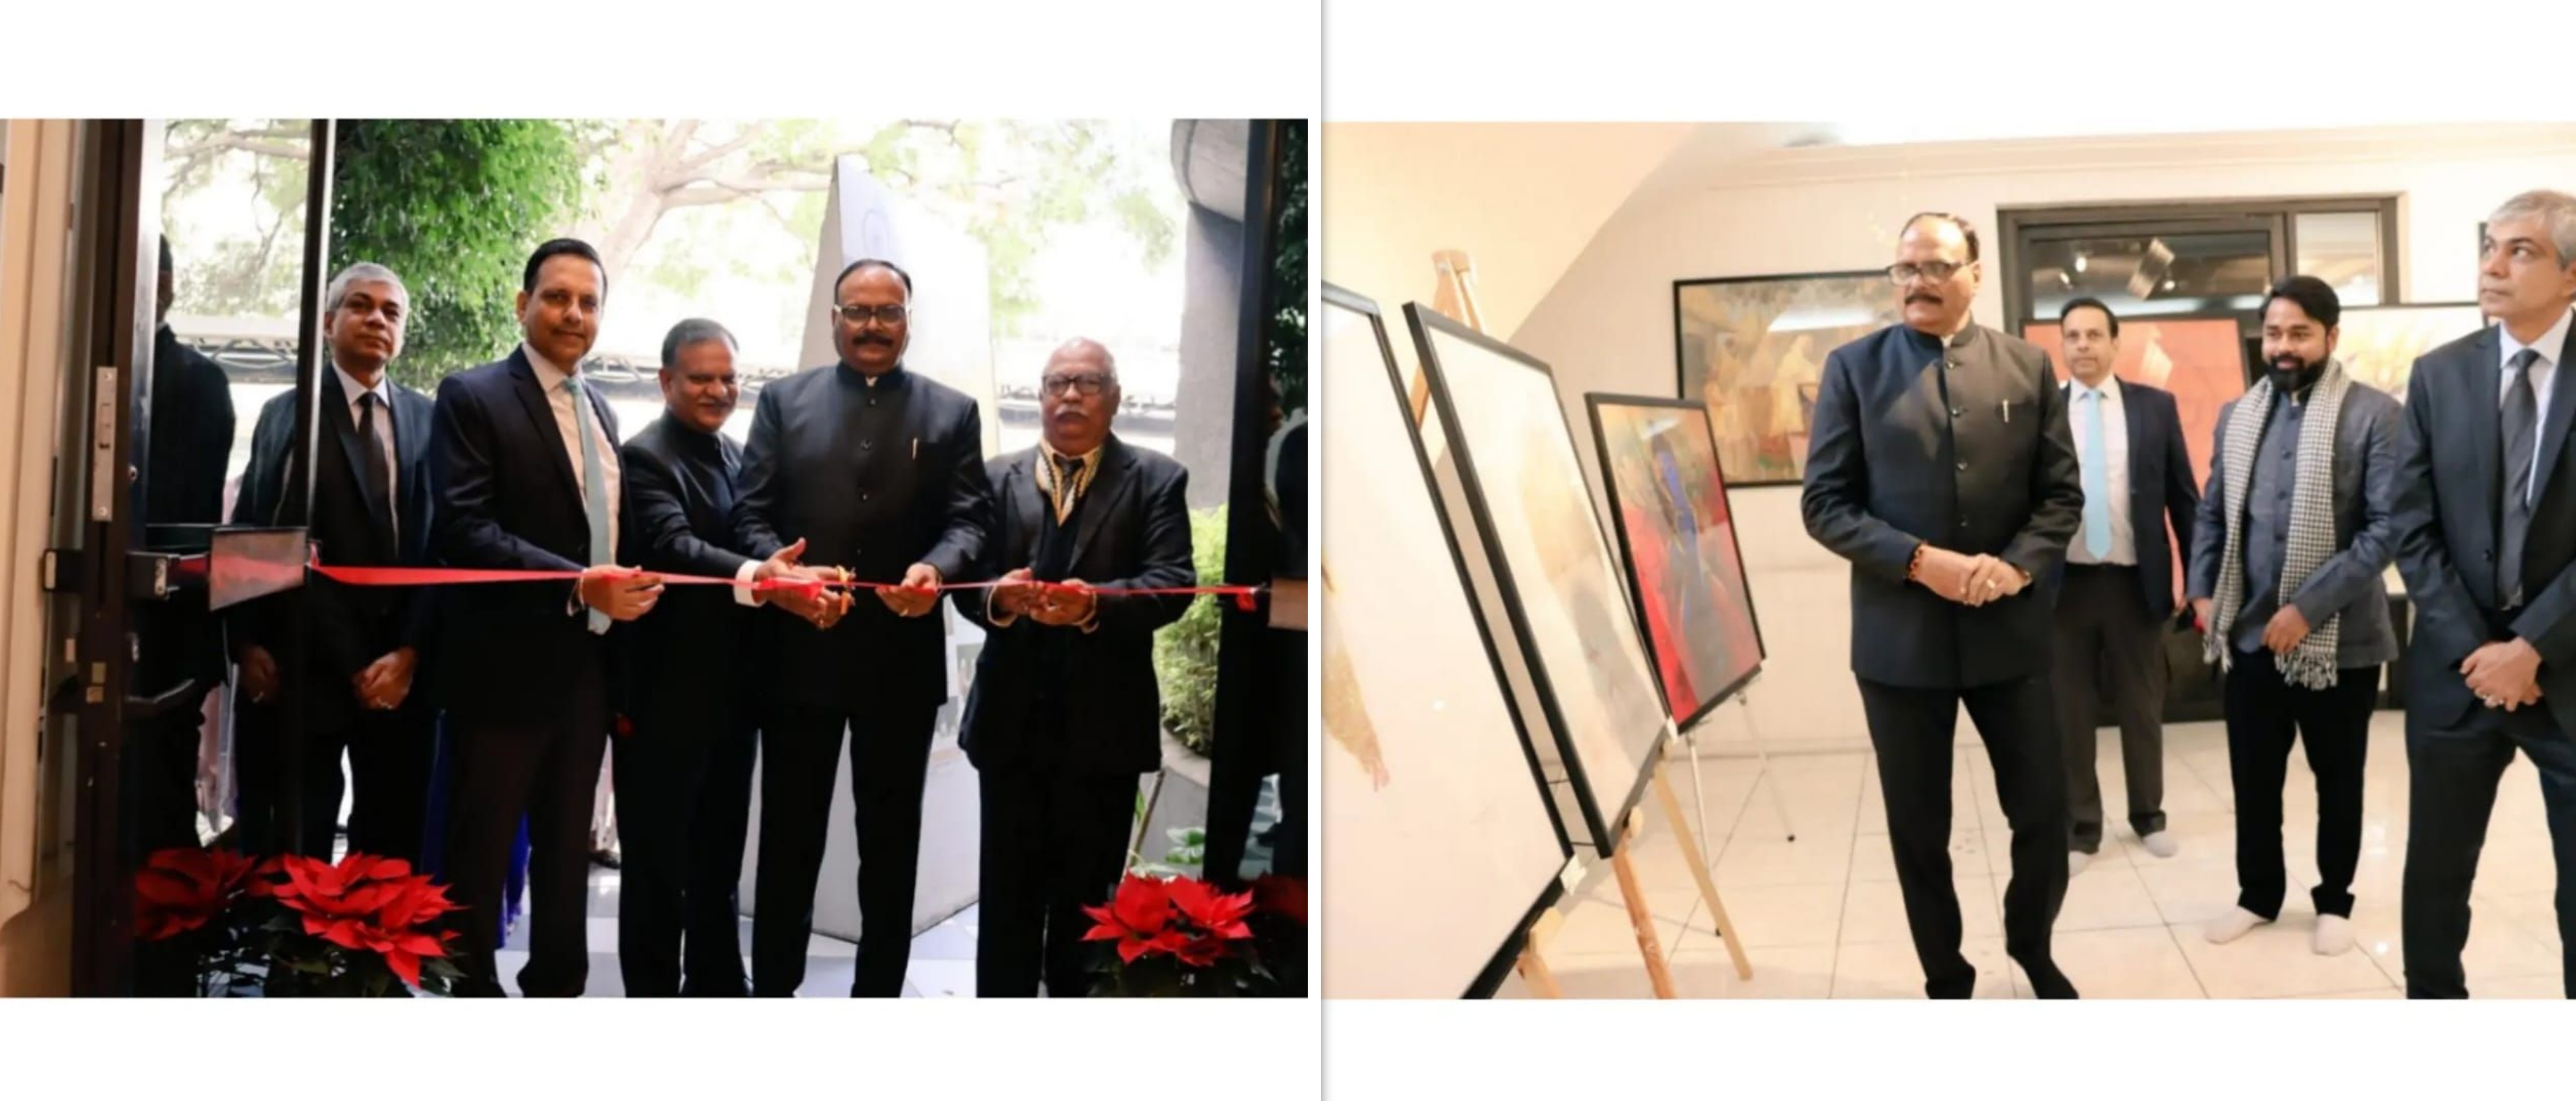  <div style="fcolor: #fff; font-weight: 600; font-size: 1.5em;">
<p style="font-size: 13.8px;">Hon'ble Deputy Chief Minister of Uttar Pradesh Shri Brajesh Pathak  visited the Gurudev Tagore Indian Cultural Centre in Mexico City and inaugurated the 'Lok mein Ram' picture exhibition.
<br /><span style="text-align: center;">09 December 2022</span></p>
</div>